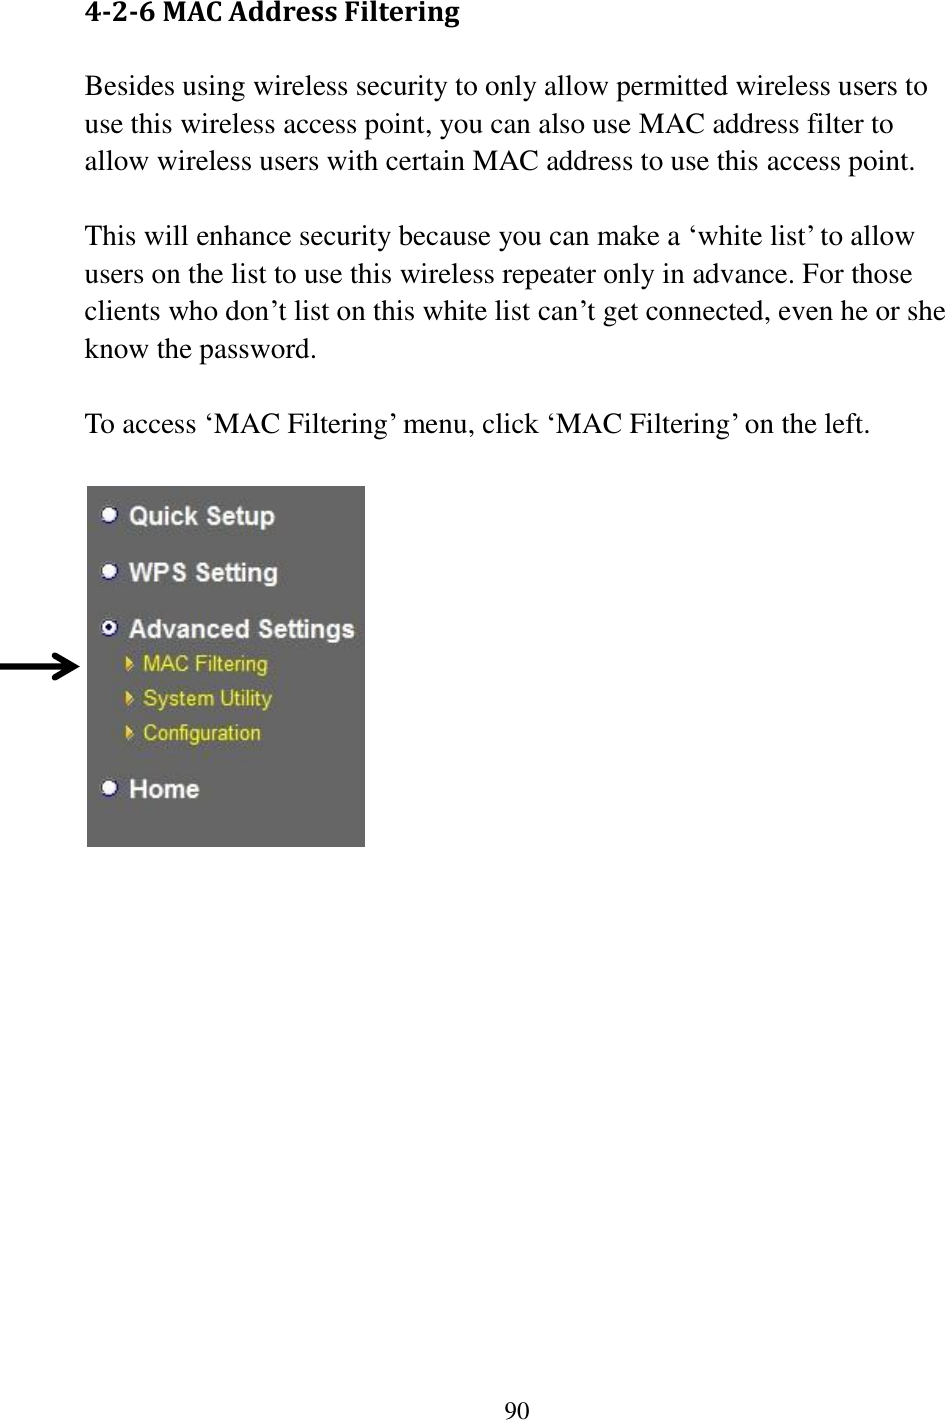 90  4-2-6 MAC Address Filtering Besides using wireless security to only allow permitted wireless users to use this wireless access point, you can also use MAC address filter to allow wireless users with certain MAC address to use this access point.  This will enhance security because you can make a „white list‟ to allow users on the list to use this wireless repeater only in advance. For those clients who don‟t list on this white list can‟t get connected, even he or she know the password.  To access „MAC Filtering‟ menu, click „MAC Filtering‟ on the left.       